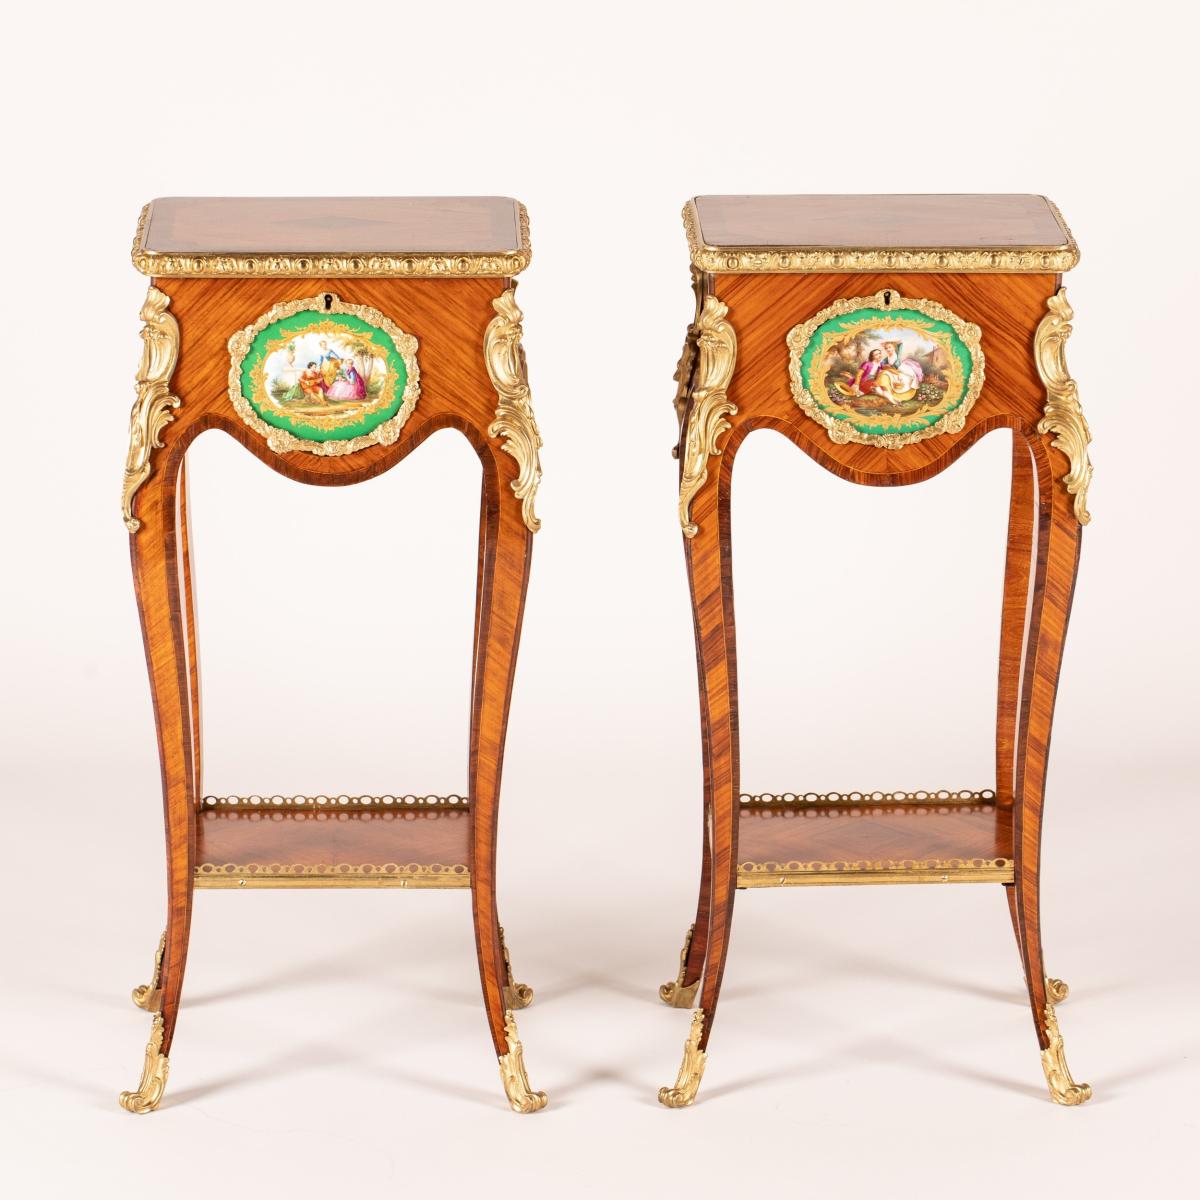 A Pair of Occasional Tables in the Louis XV Transitional Taste